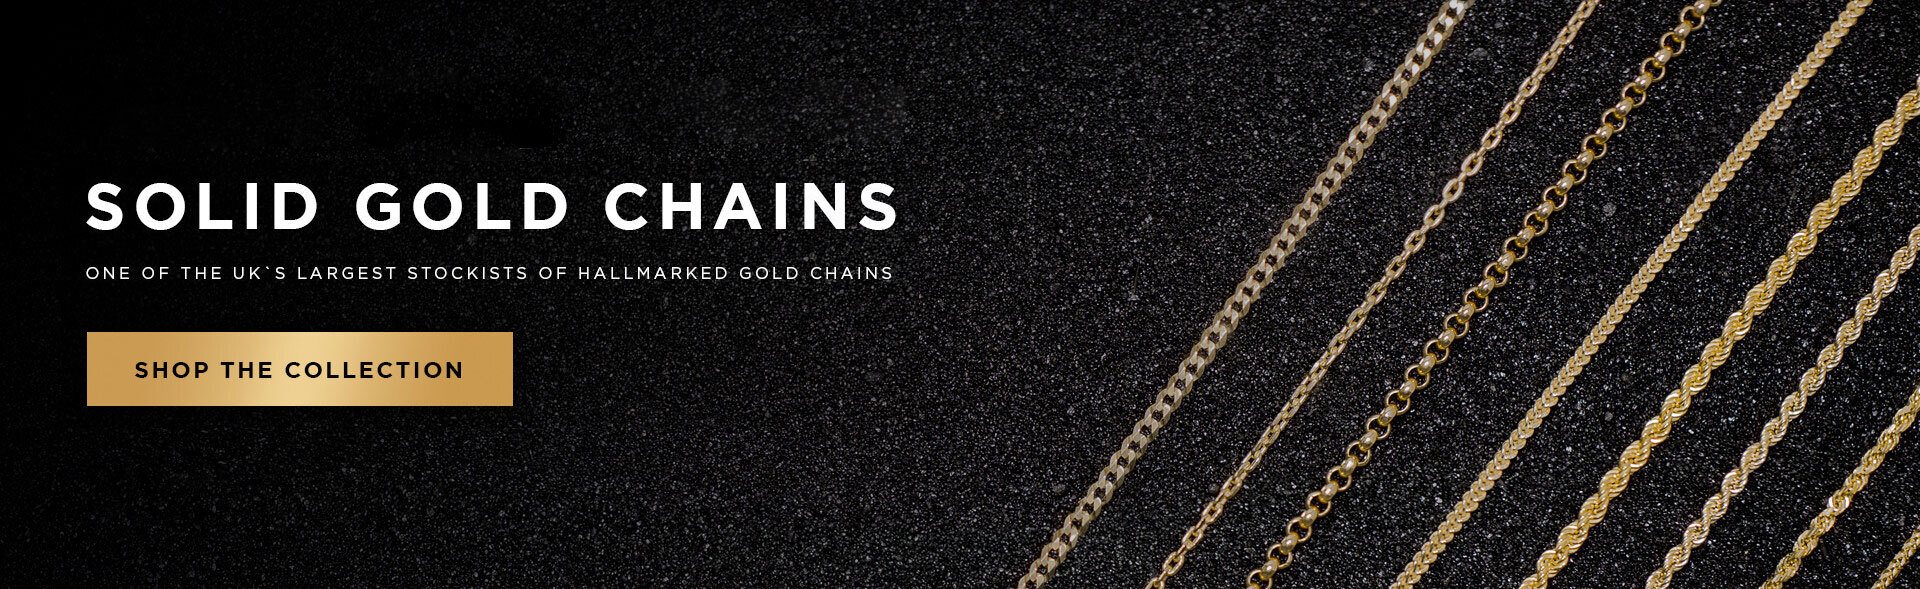 View our solid gold chains